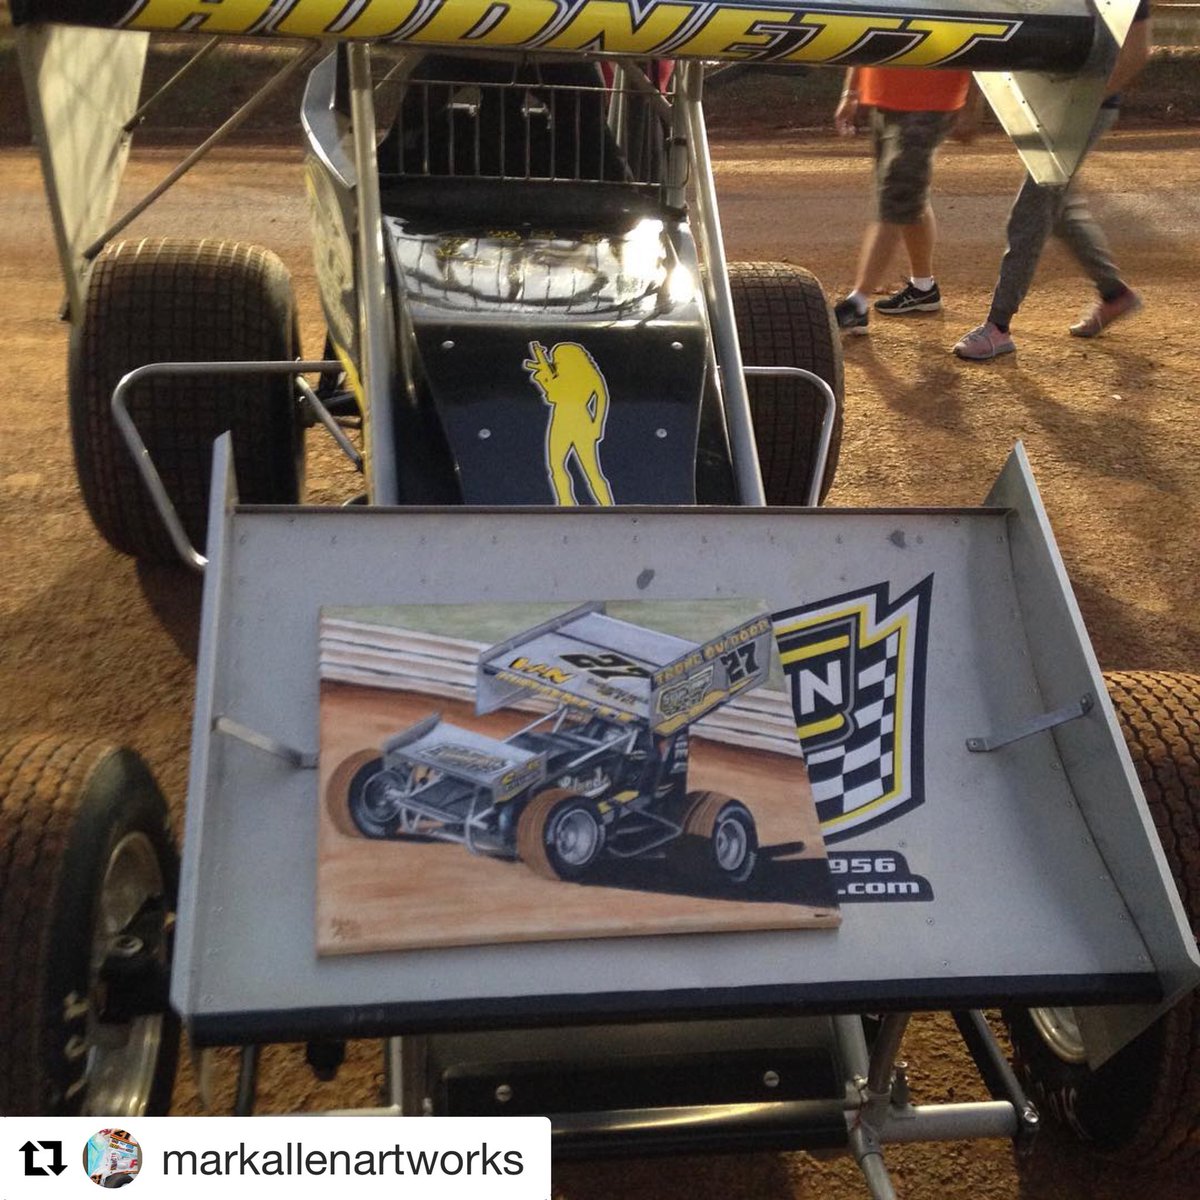 #Repost @markallenartworks #racingfamily
・・・
There will be an auction at the Tuscarora 50 for the Hodnett family and I am honored that my painting will be included in that. #greghodnett #williamsgrovespeedway #woocraftscs #portroyalspeedway @USACNation @WorldofOutlaws